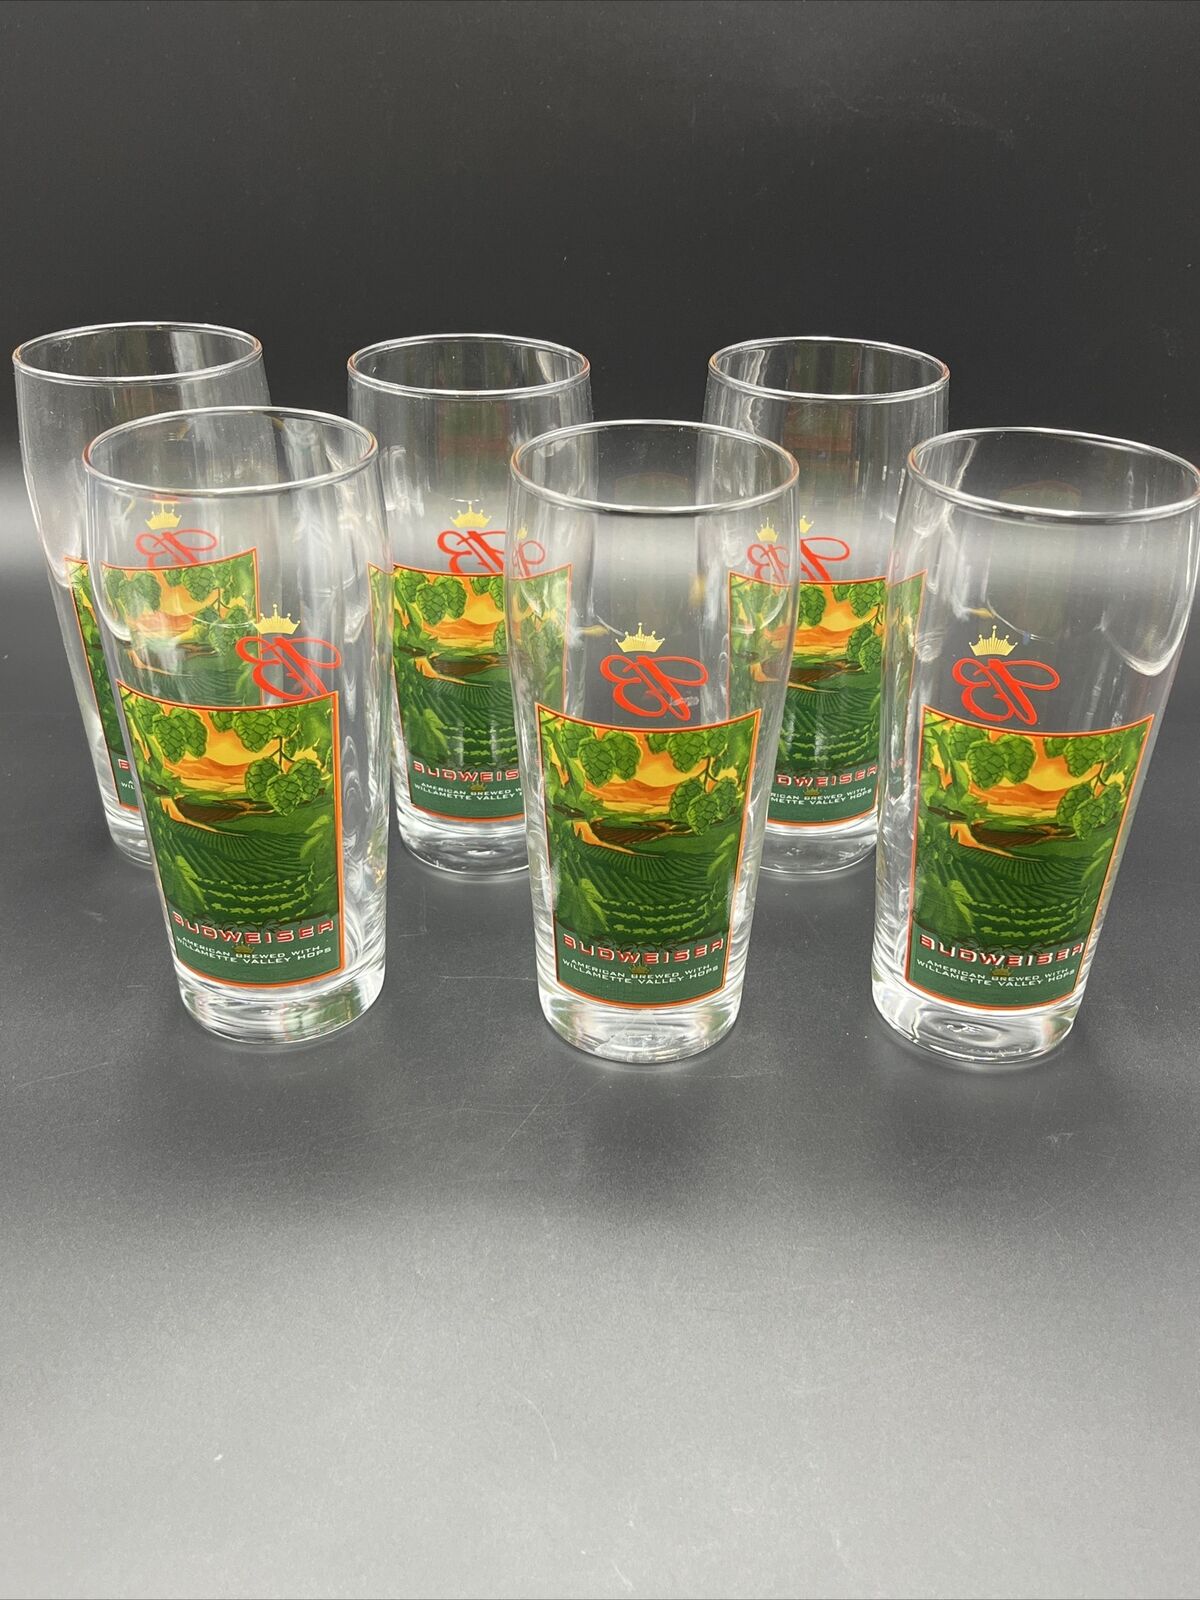 Budweiser Pilsner Glasses set of 6 American Brewed with Willamette Valley Hops